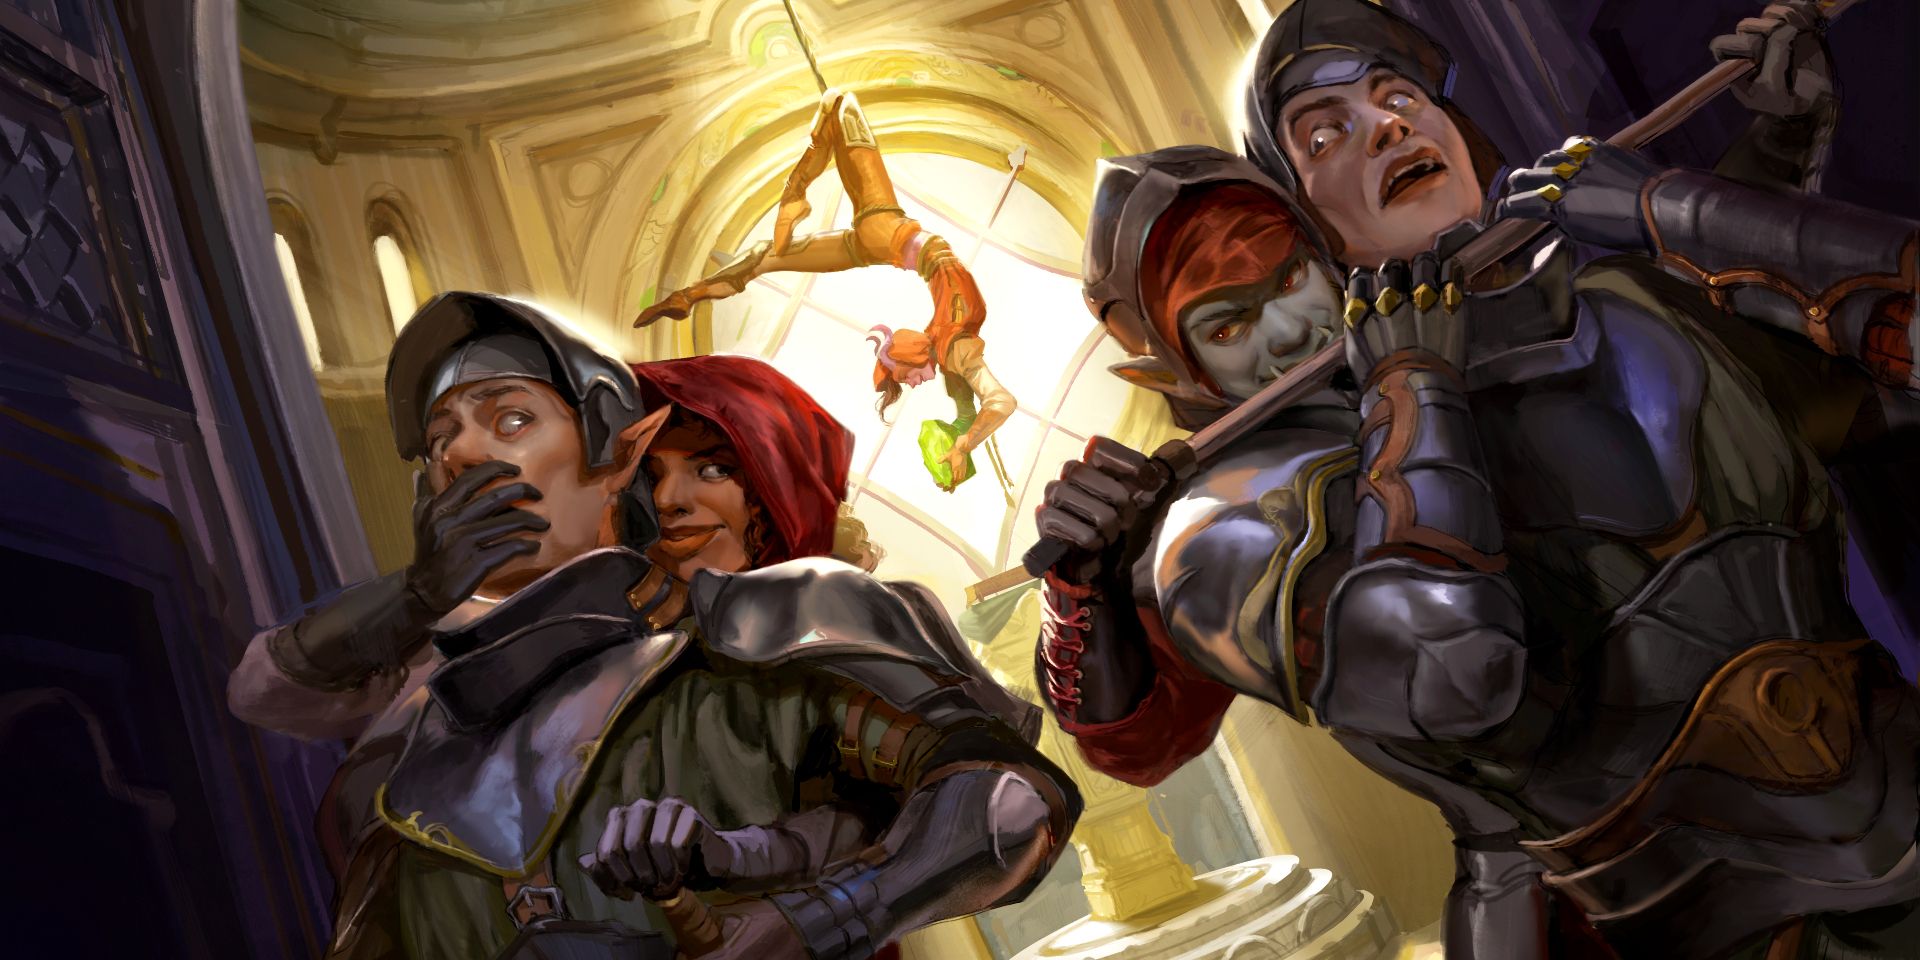 Two DnD assassins grab guards from behind to get keys to the golden vault Evyn Fong